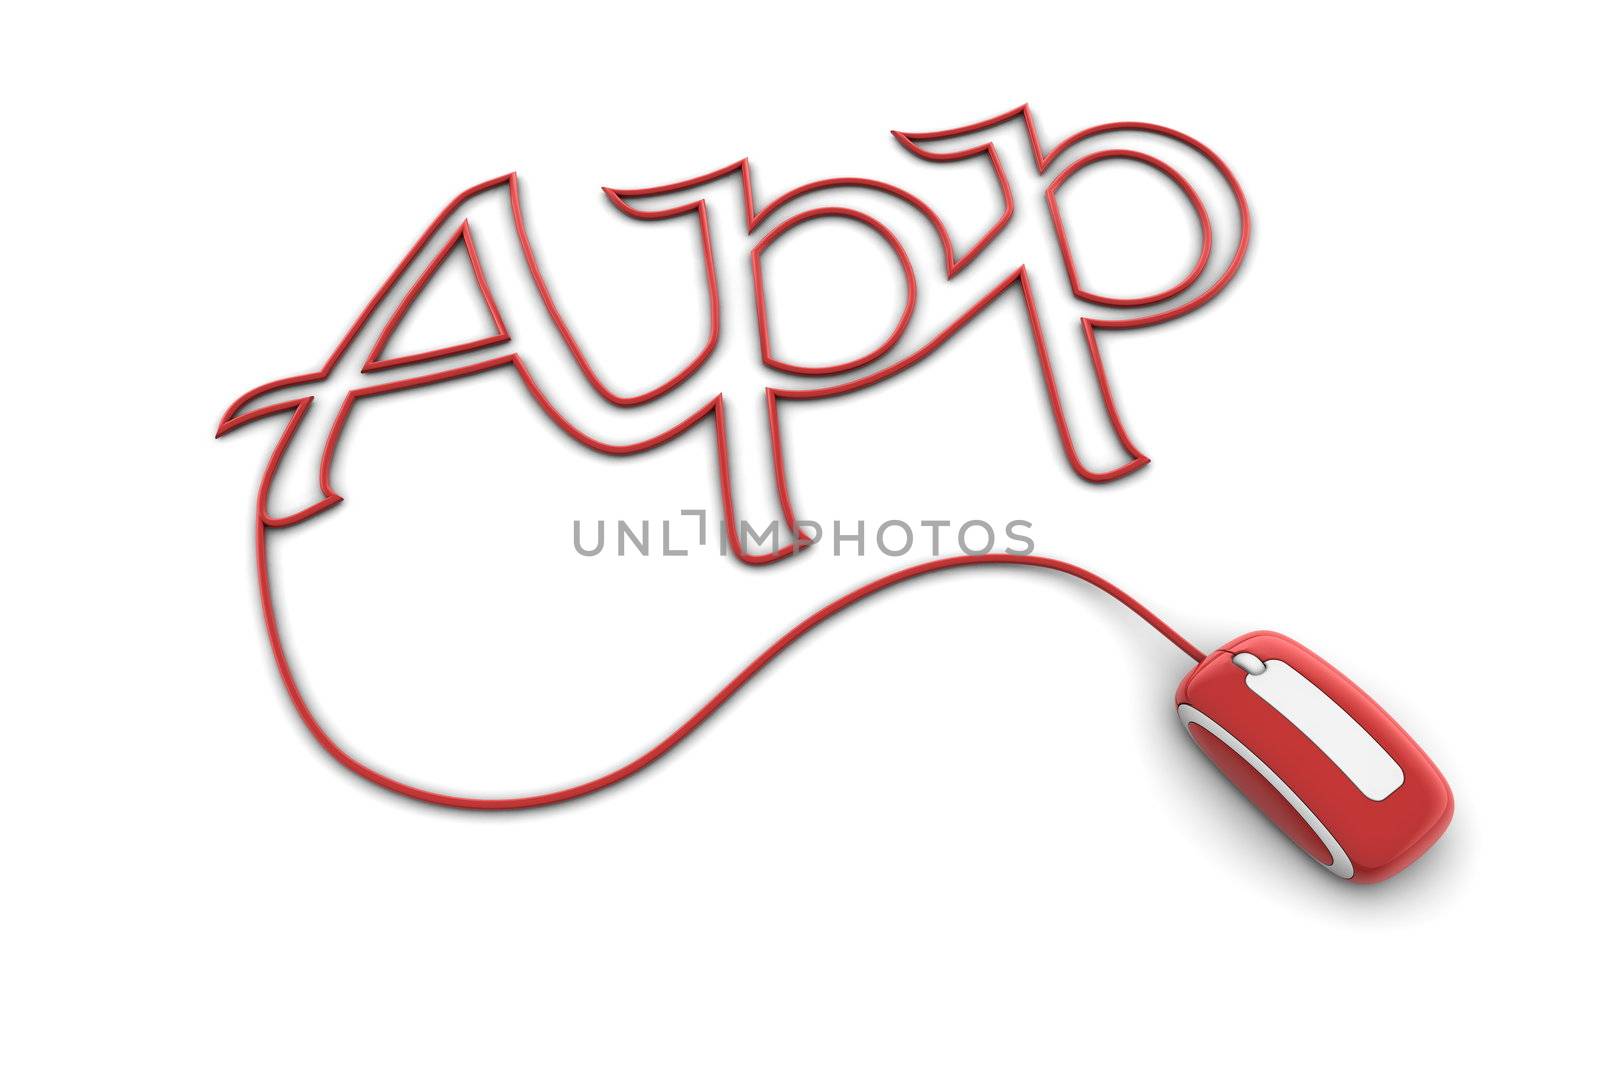 modern glossy red computer mouse is connected to the shiny red word App - letters are formed by the mouse cable